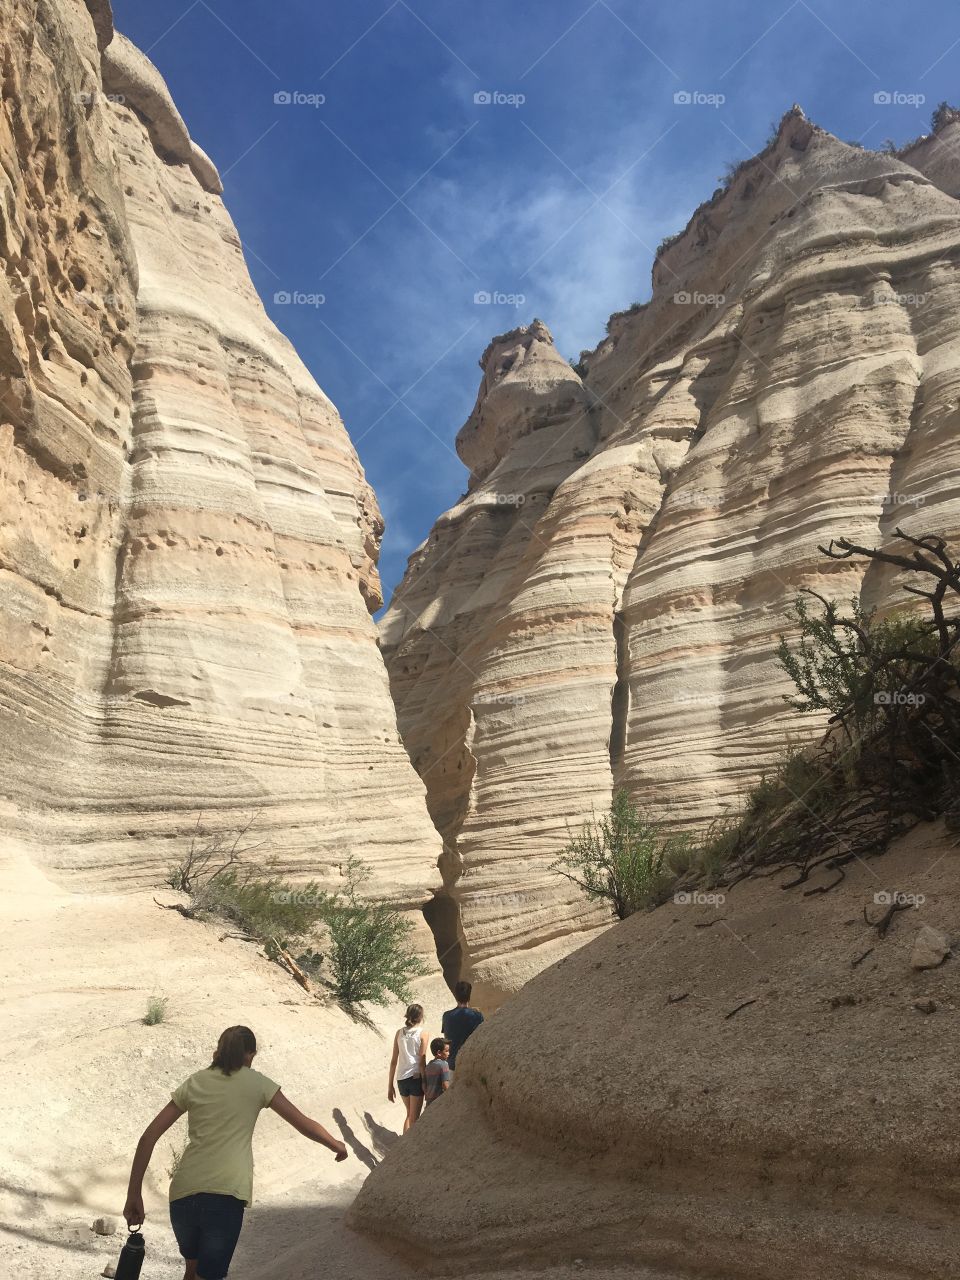 Tent Rocks National Monument, NM